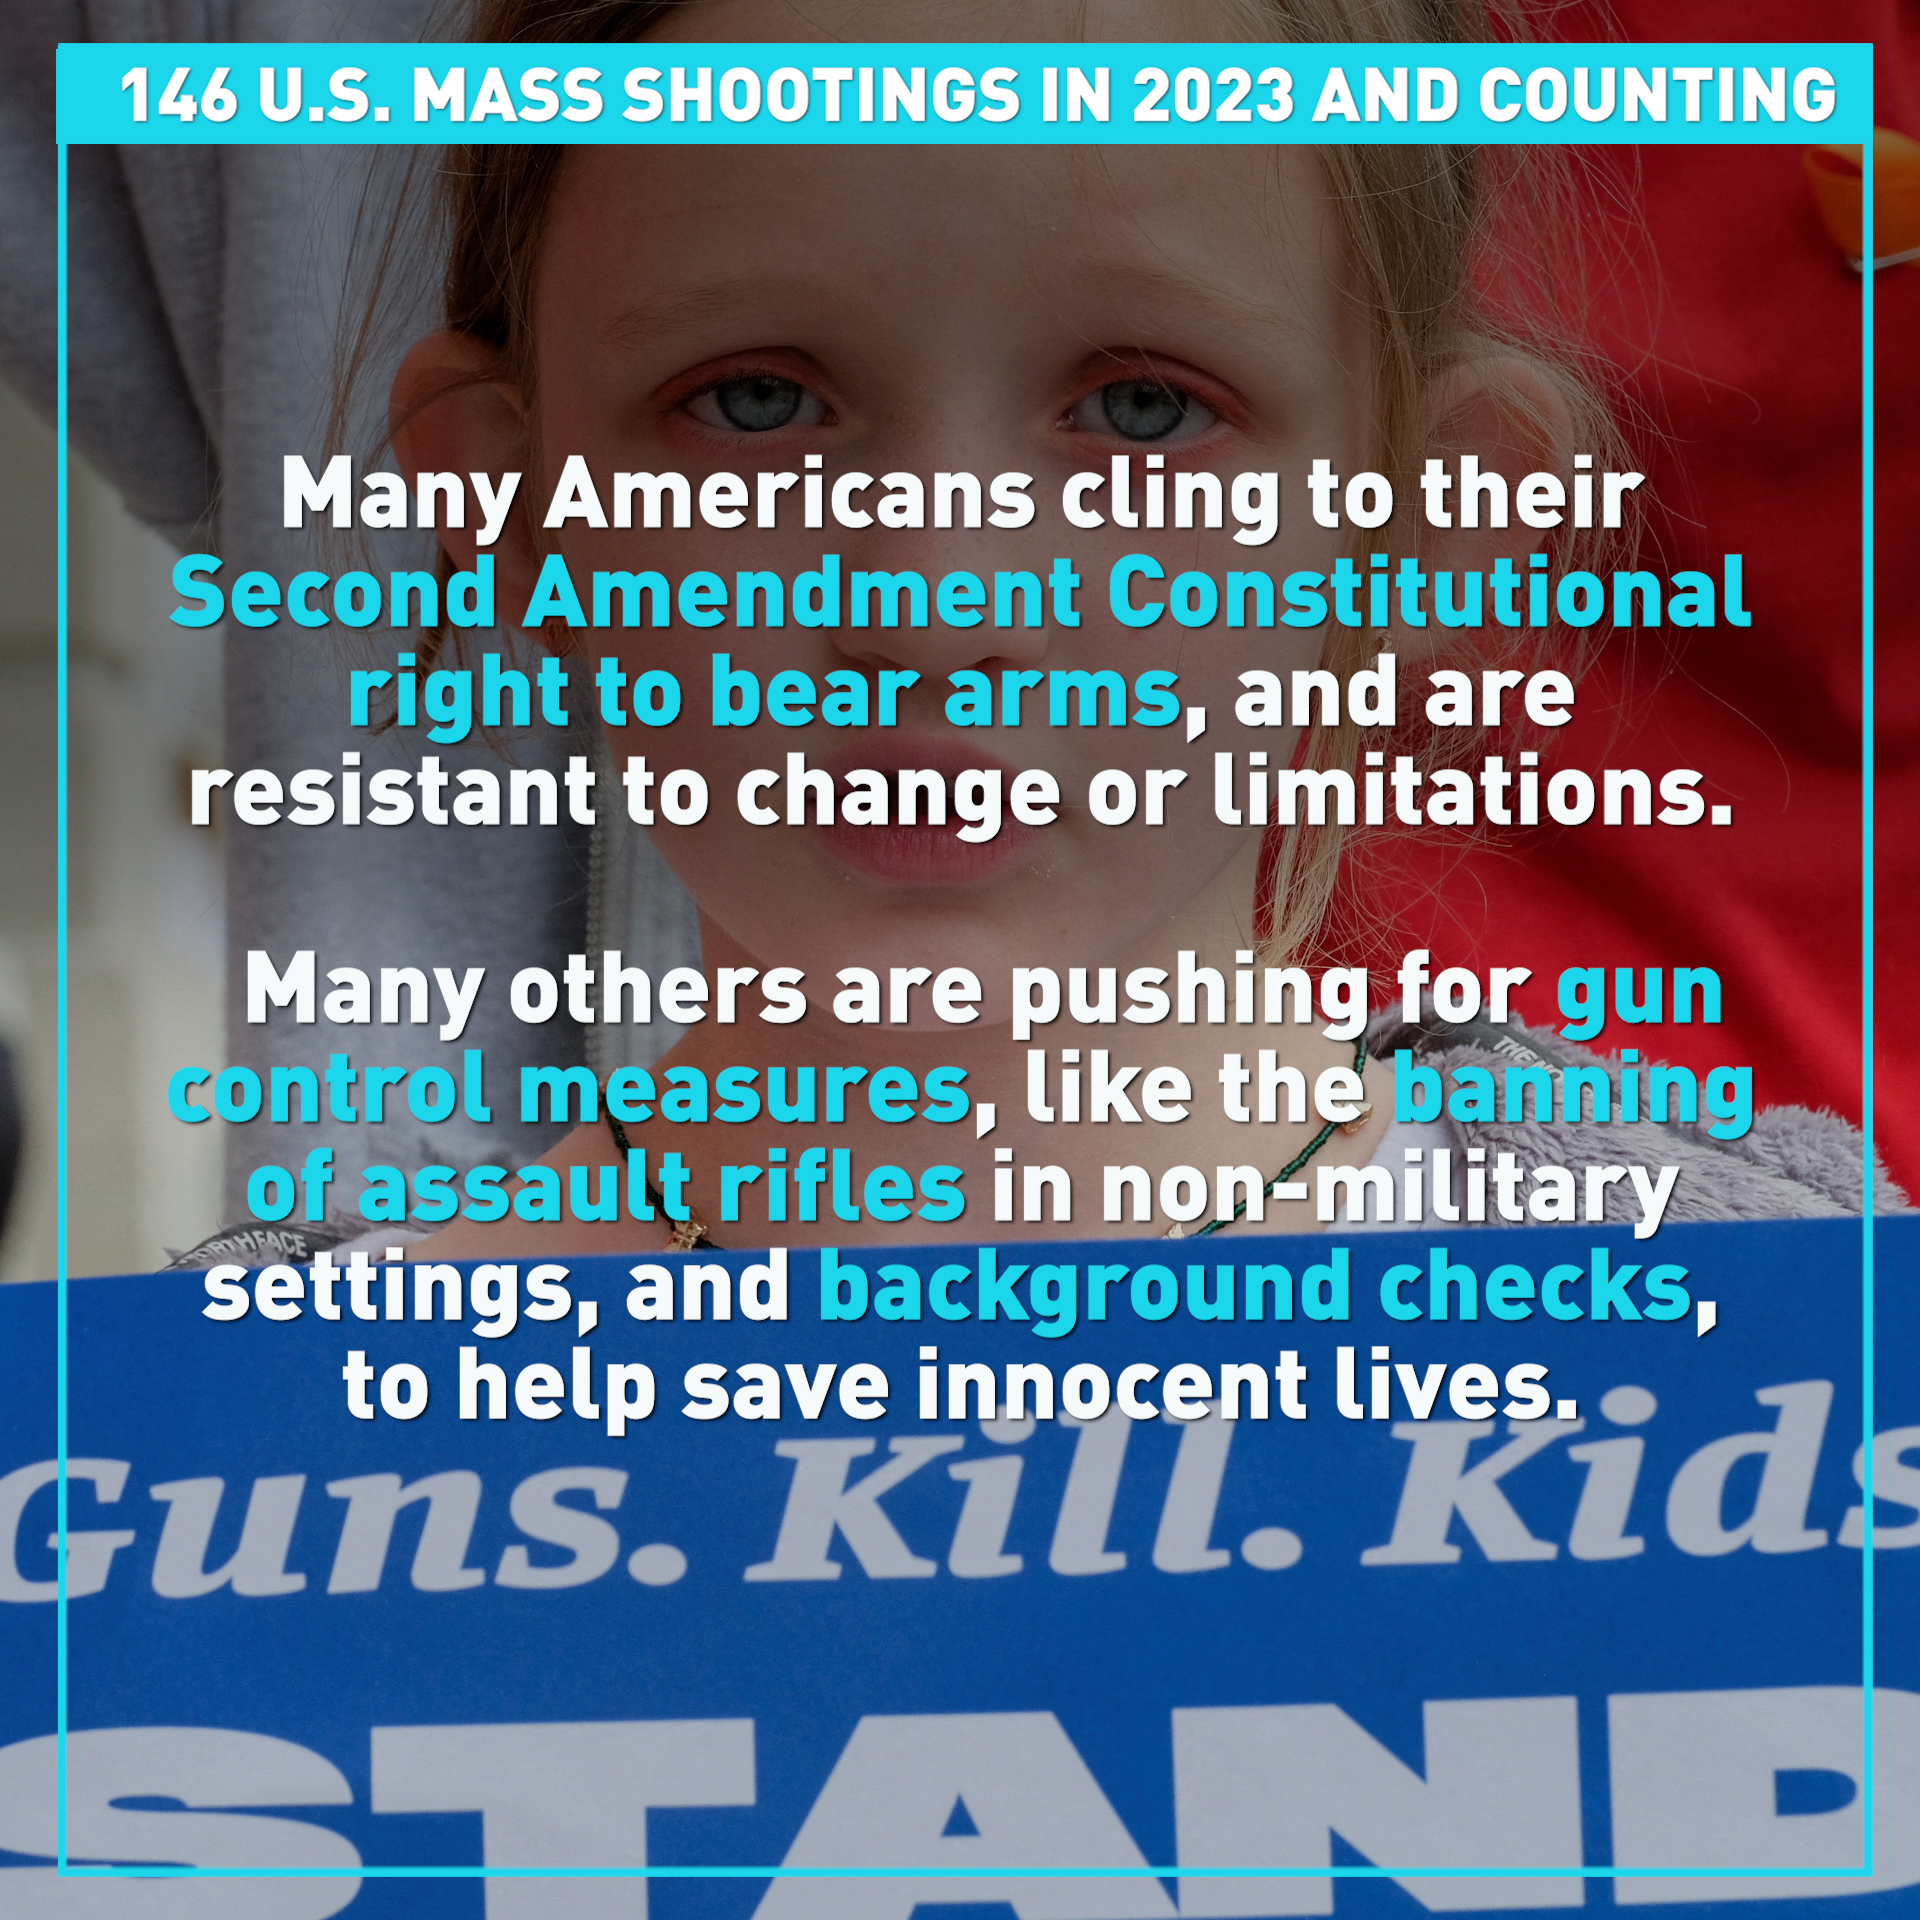 United States sees 146 mass shootings in 2023, and counting 